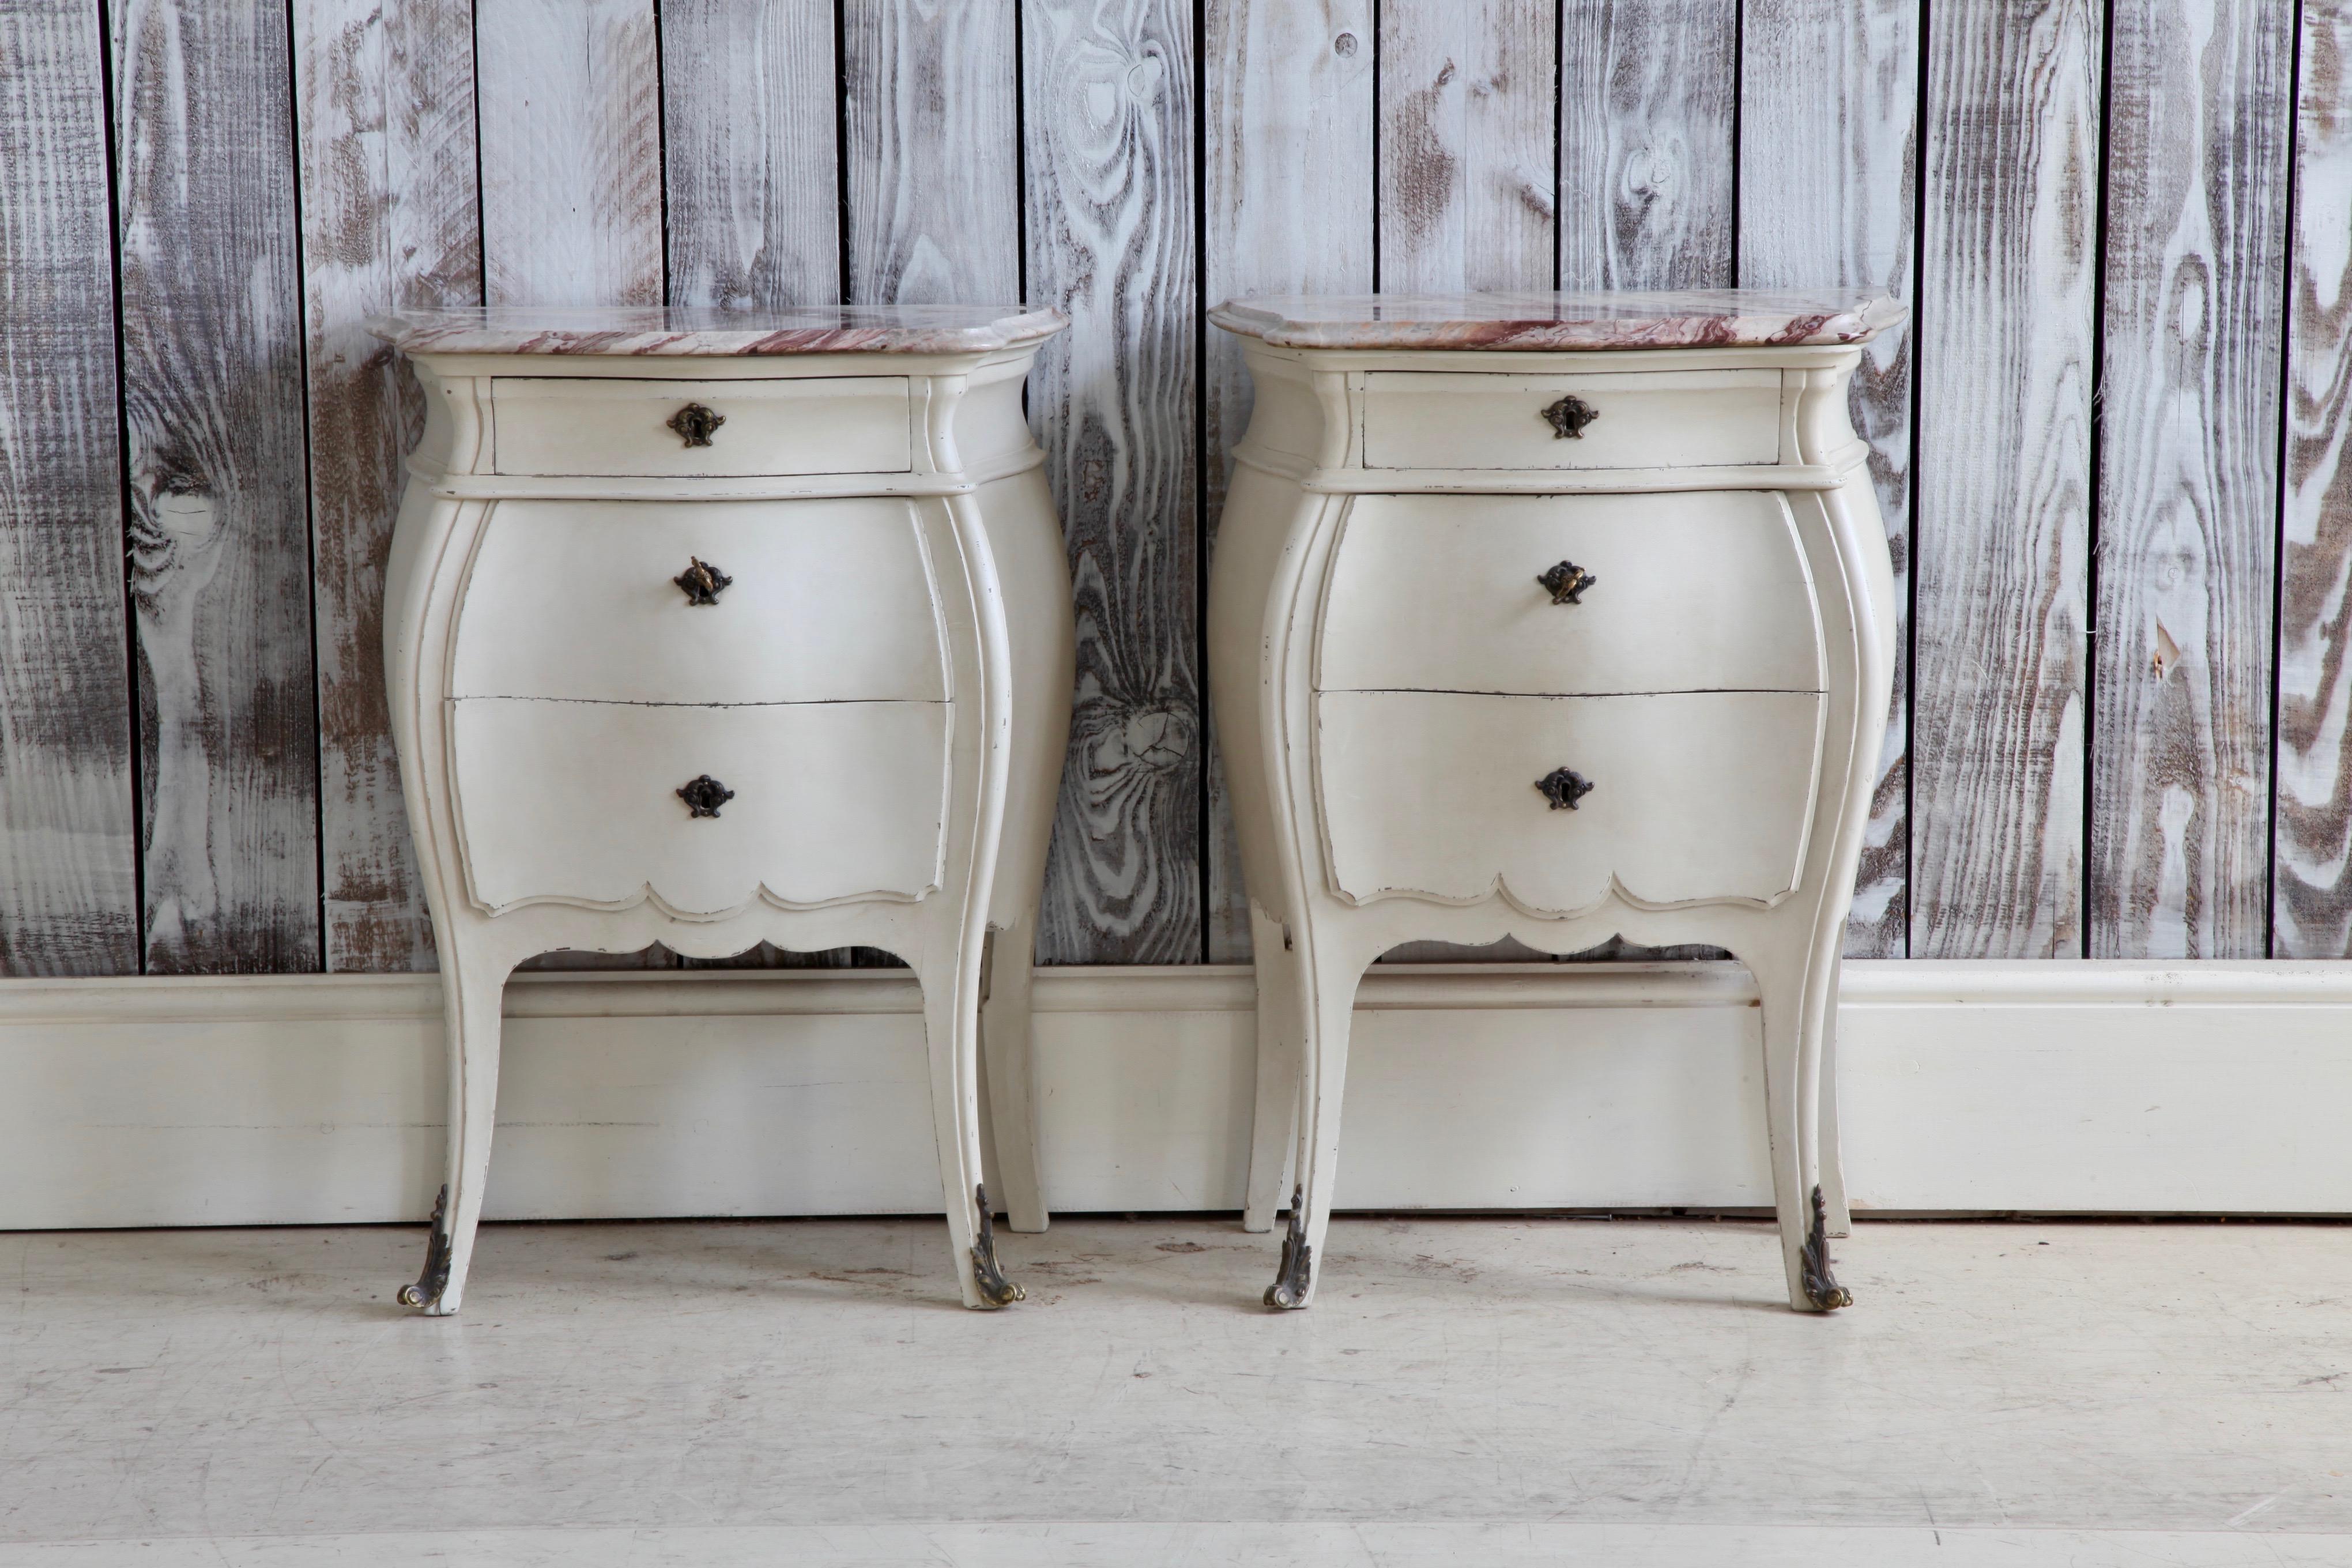 Pair of Louis XV style painted bedside tables with marble top.
Painted in a French grey color with a breche type marble.